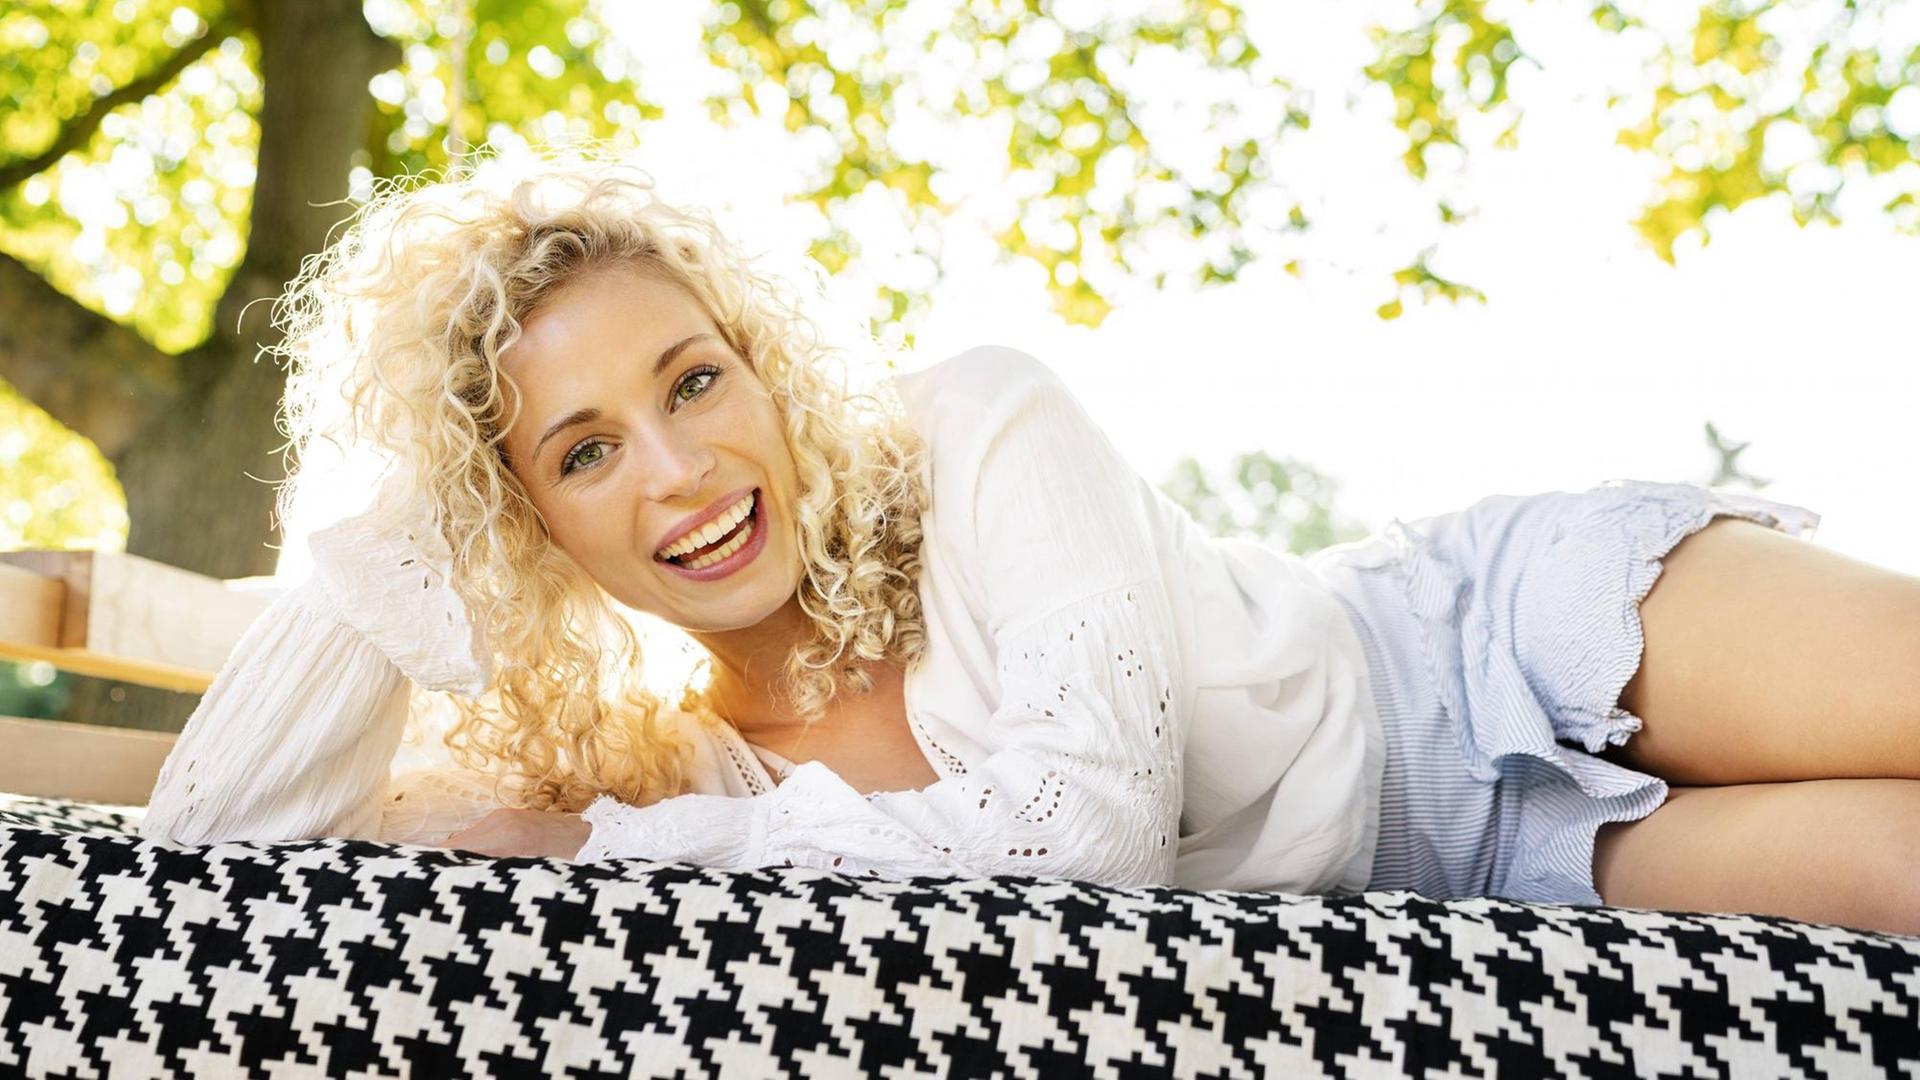 Happy young woman lying on a bed in garden model released Symbolfoto property released